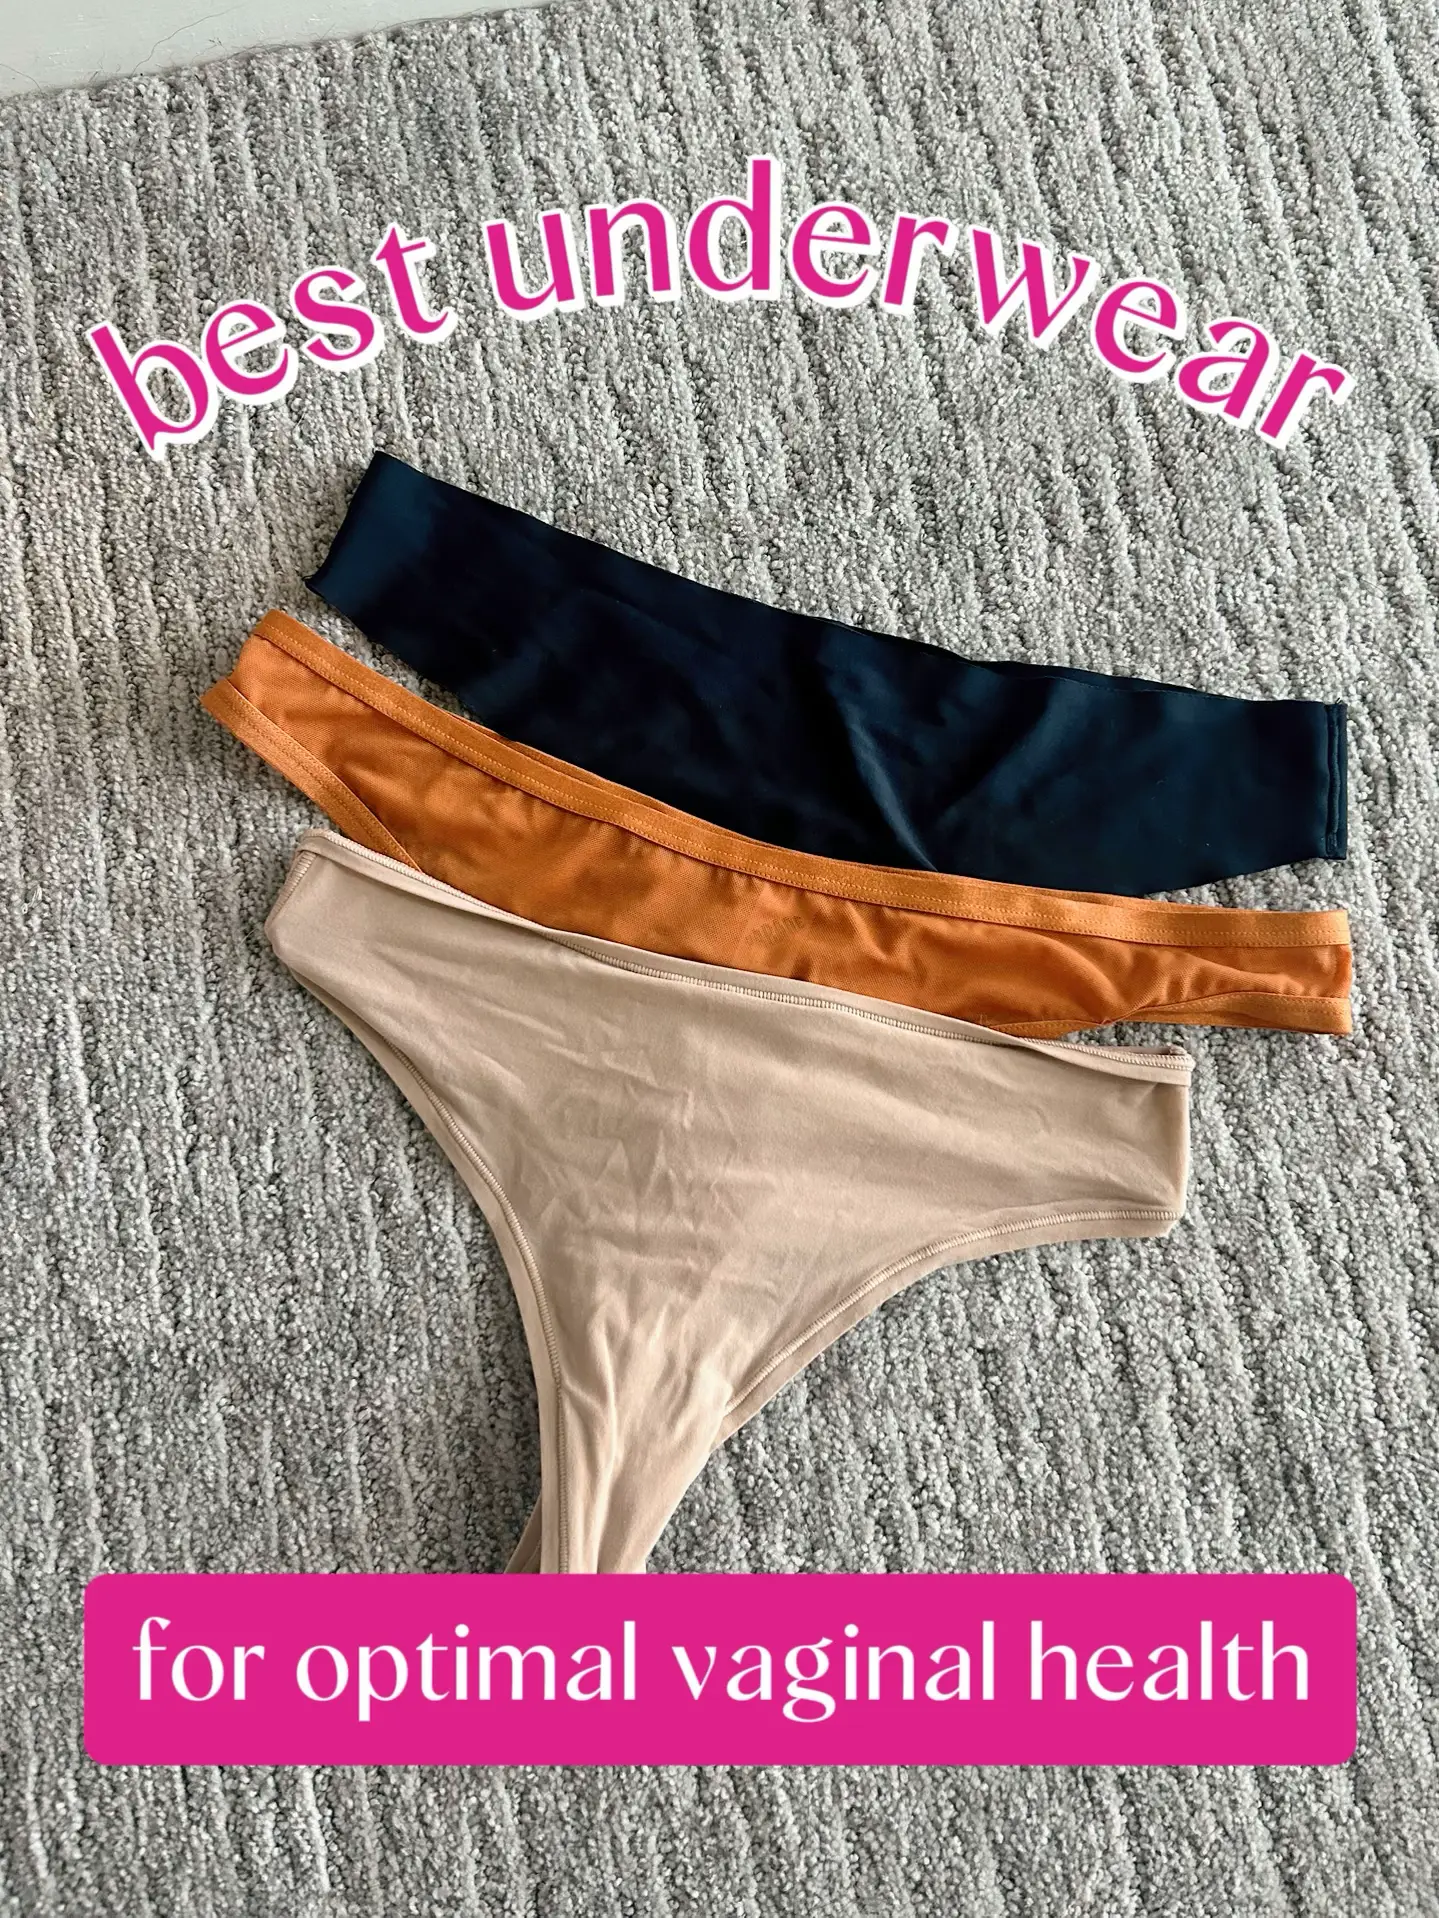 Best Underwear For Optimal Vaginal Health (imo), Gallery posted by Morgan  Green